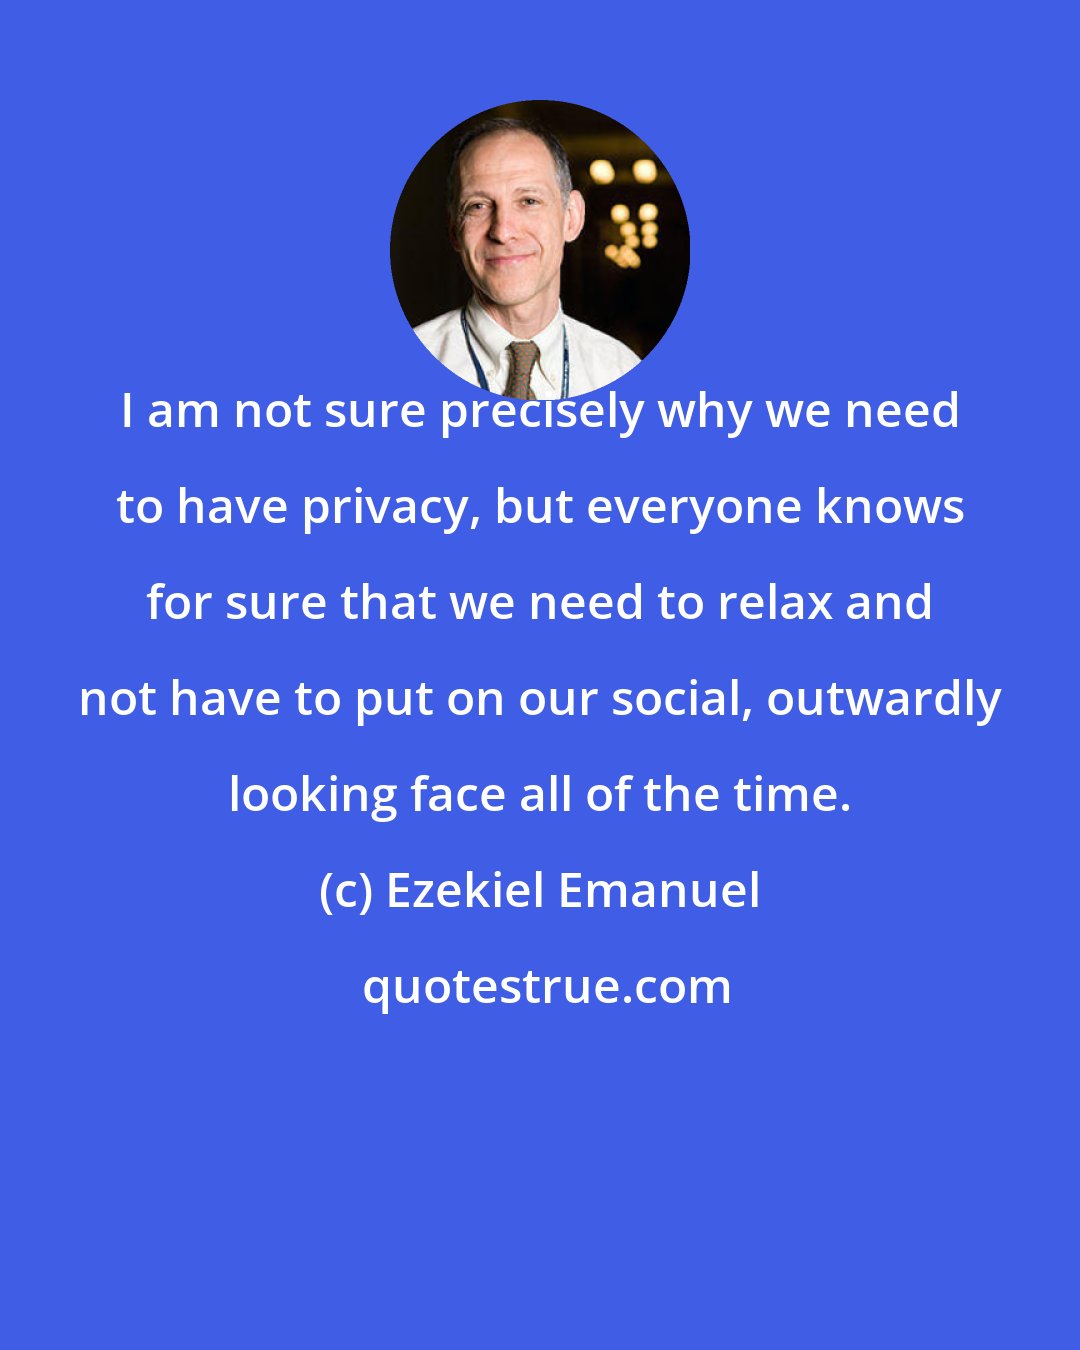 Ezekiel Emanuel: I am not sure precisely why we need to have privacy, but everyone knows for sure that we need to relax and not have to put on our social, outwardly looking face all of the time.